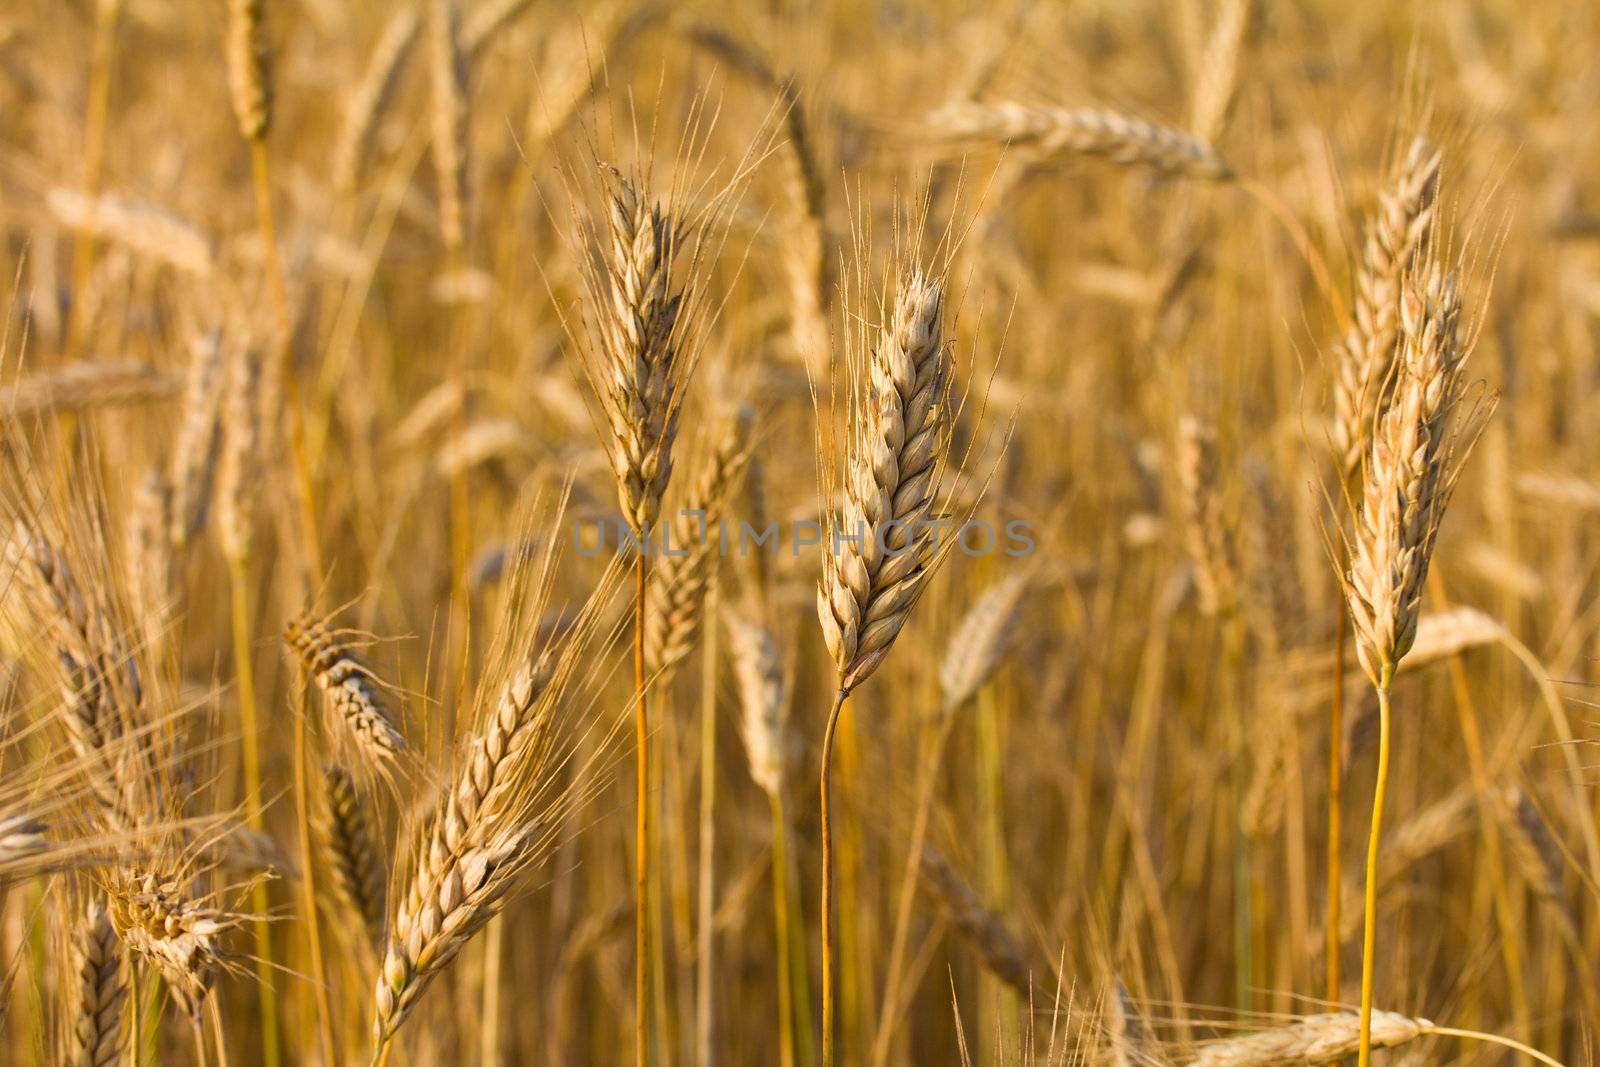 field with ripe rye background